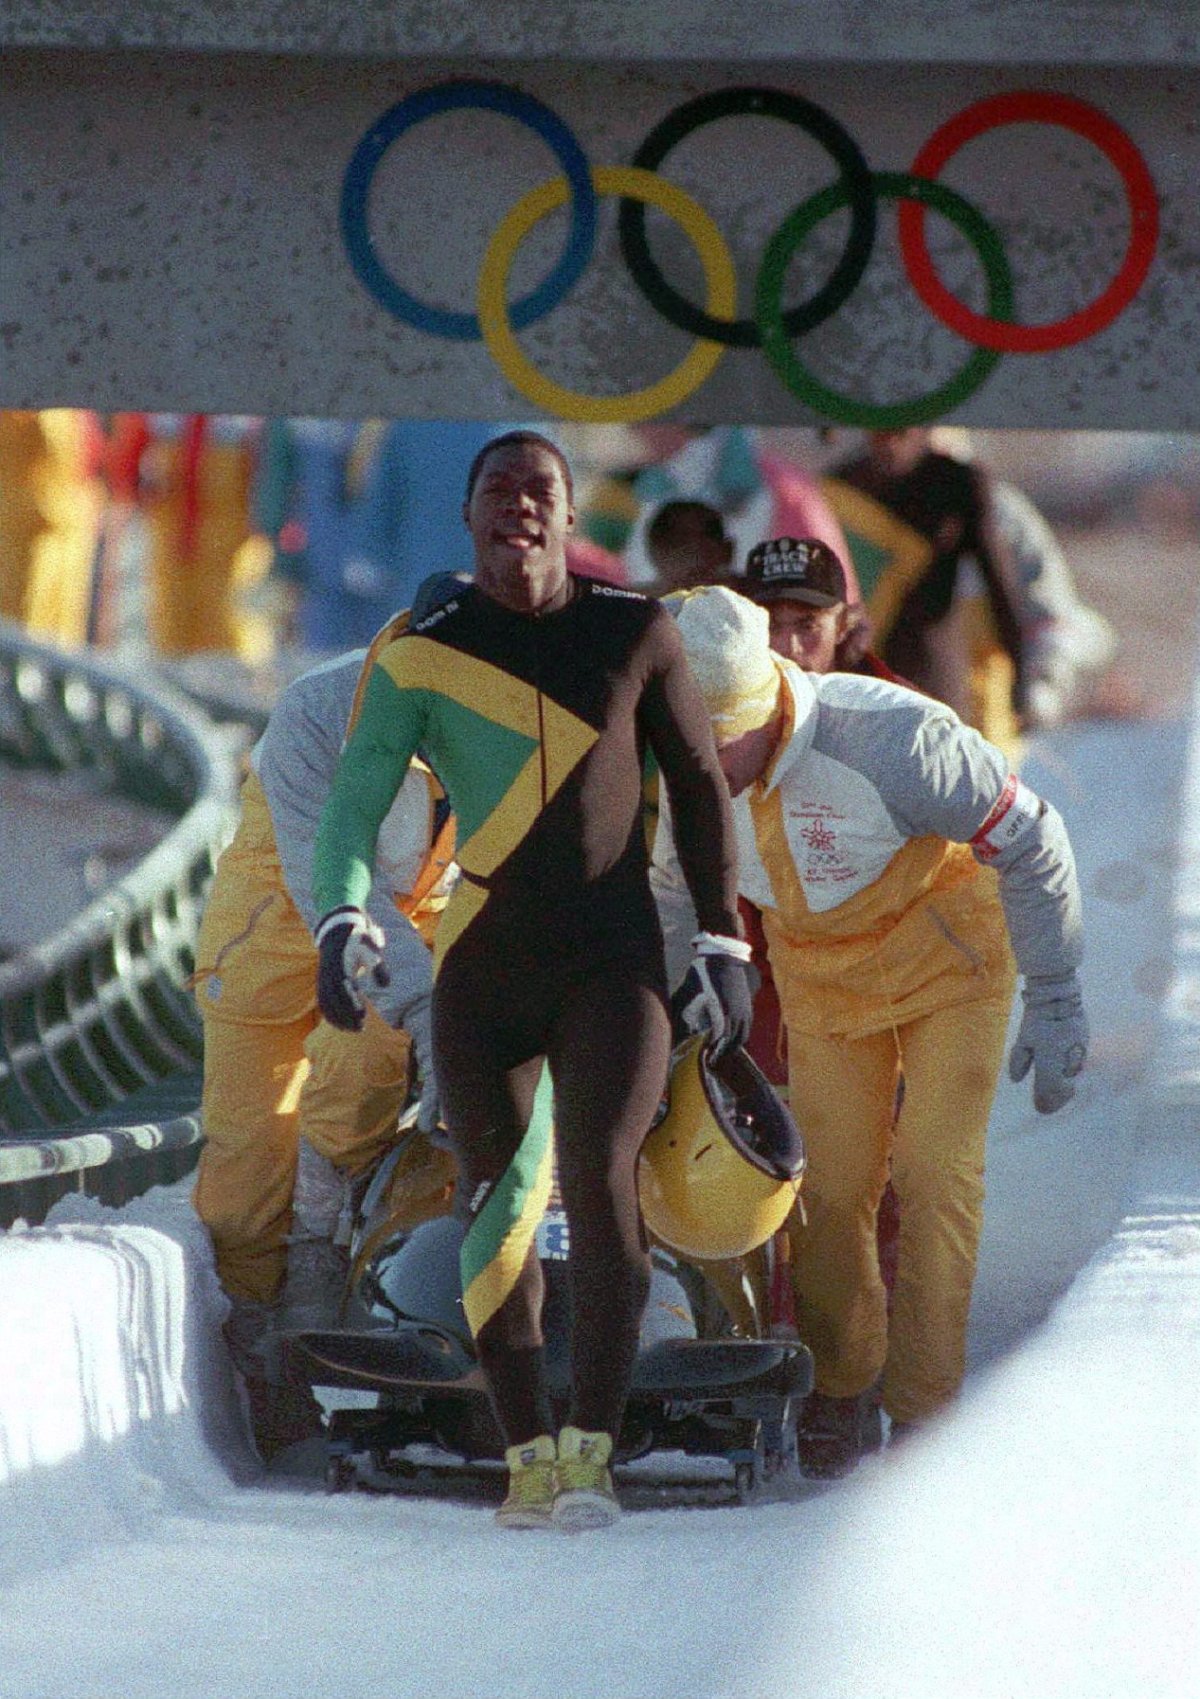 Jamaican bobsled helmet from Calgary ’88 Olympics doesn’t sell at